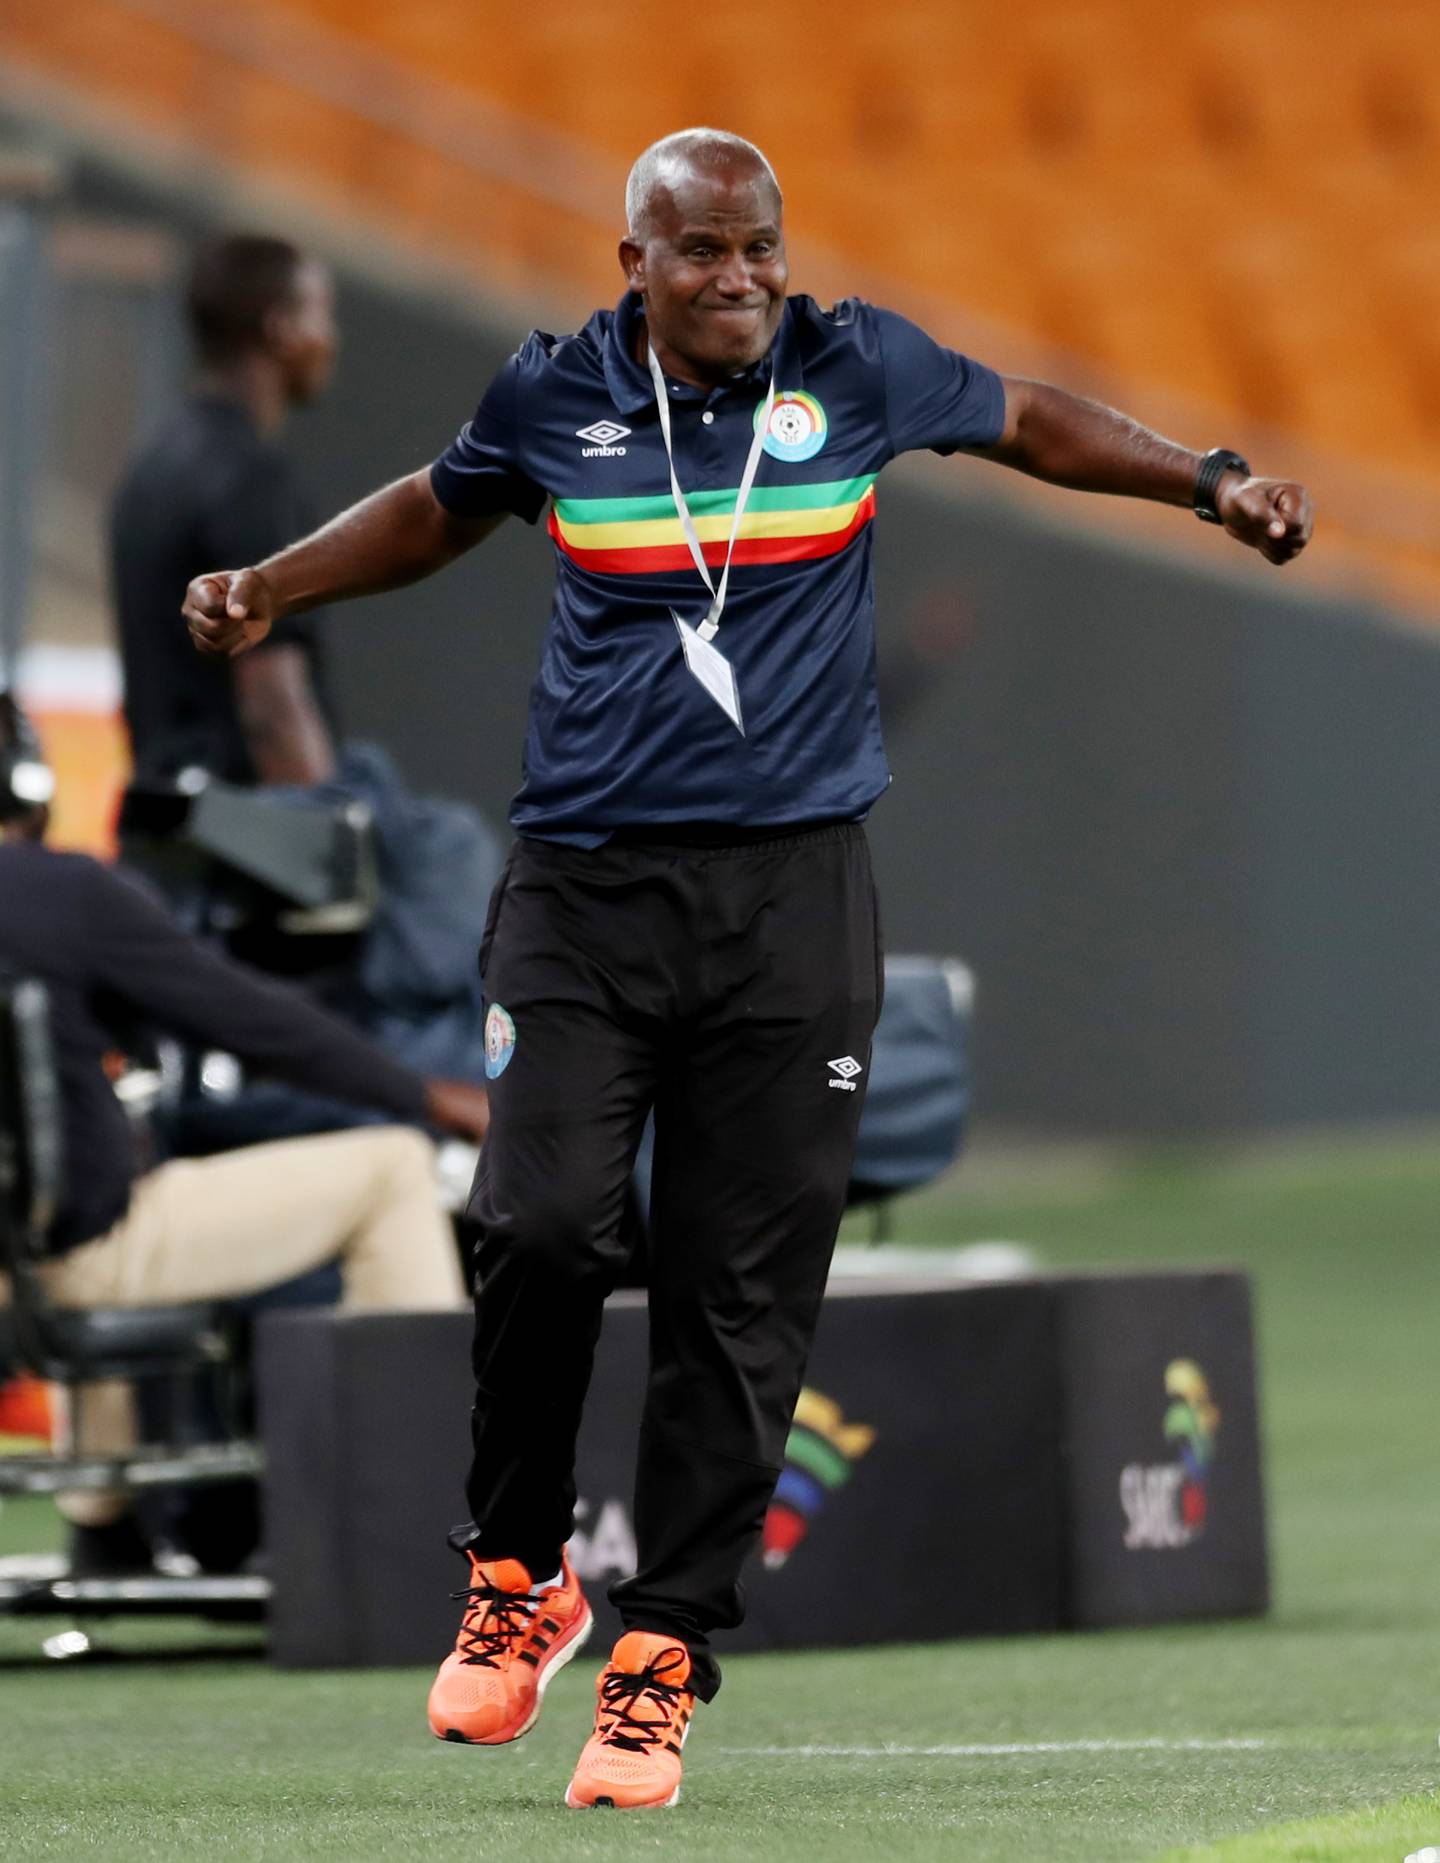 Soccer Football - World Cup - Africa Qualifiers - Group G - South Africa v Ethiopia - FNB Stadium, Johannesburg, South Africa - October 12, 2021 Ethiopia coach Wubetu Abate REUTERS / Siphiwe Sibeko